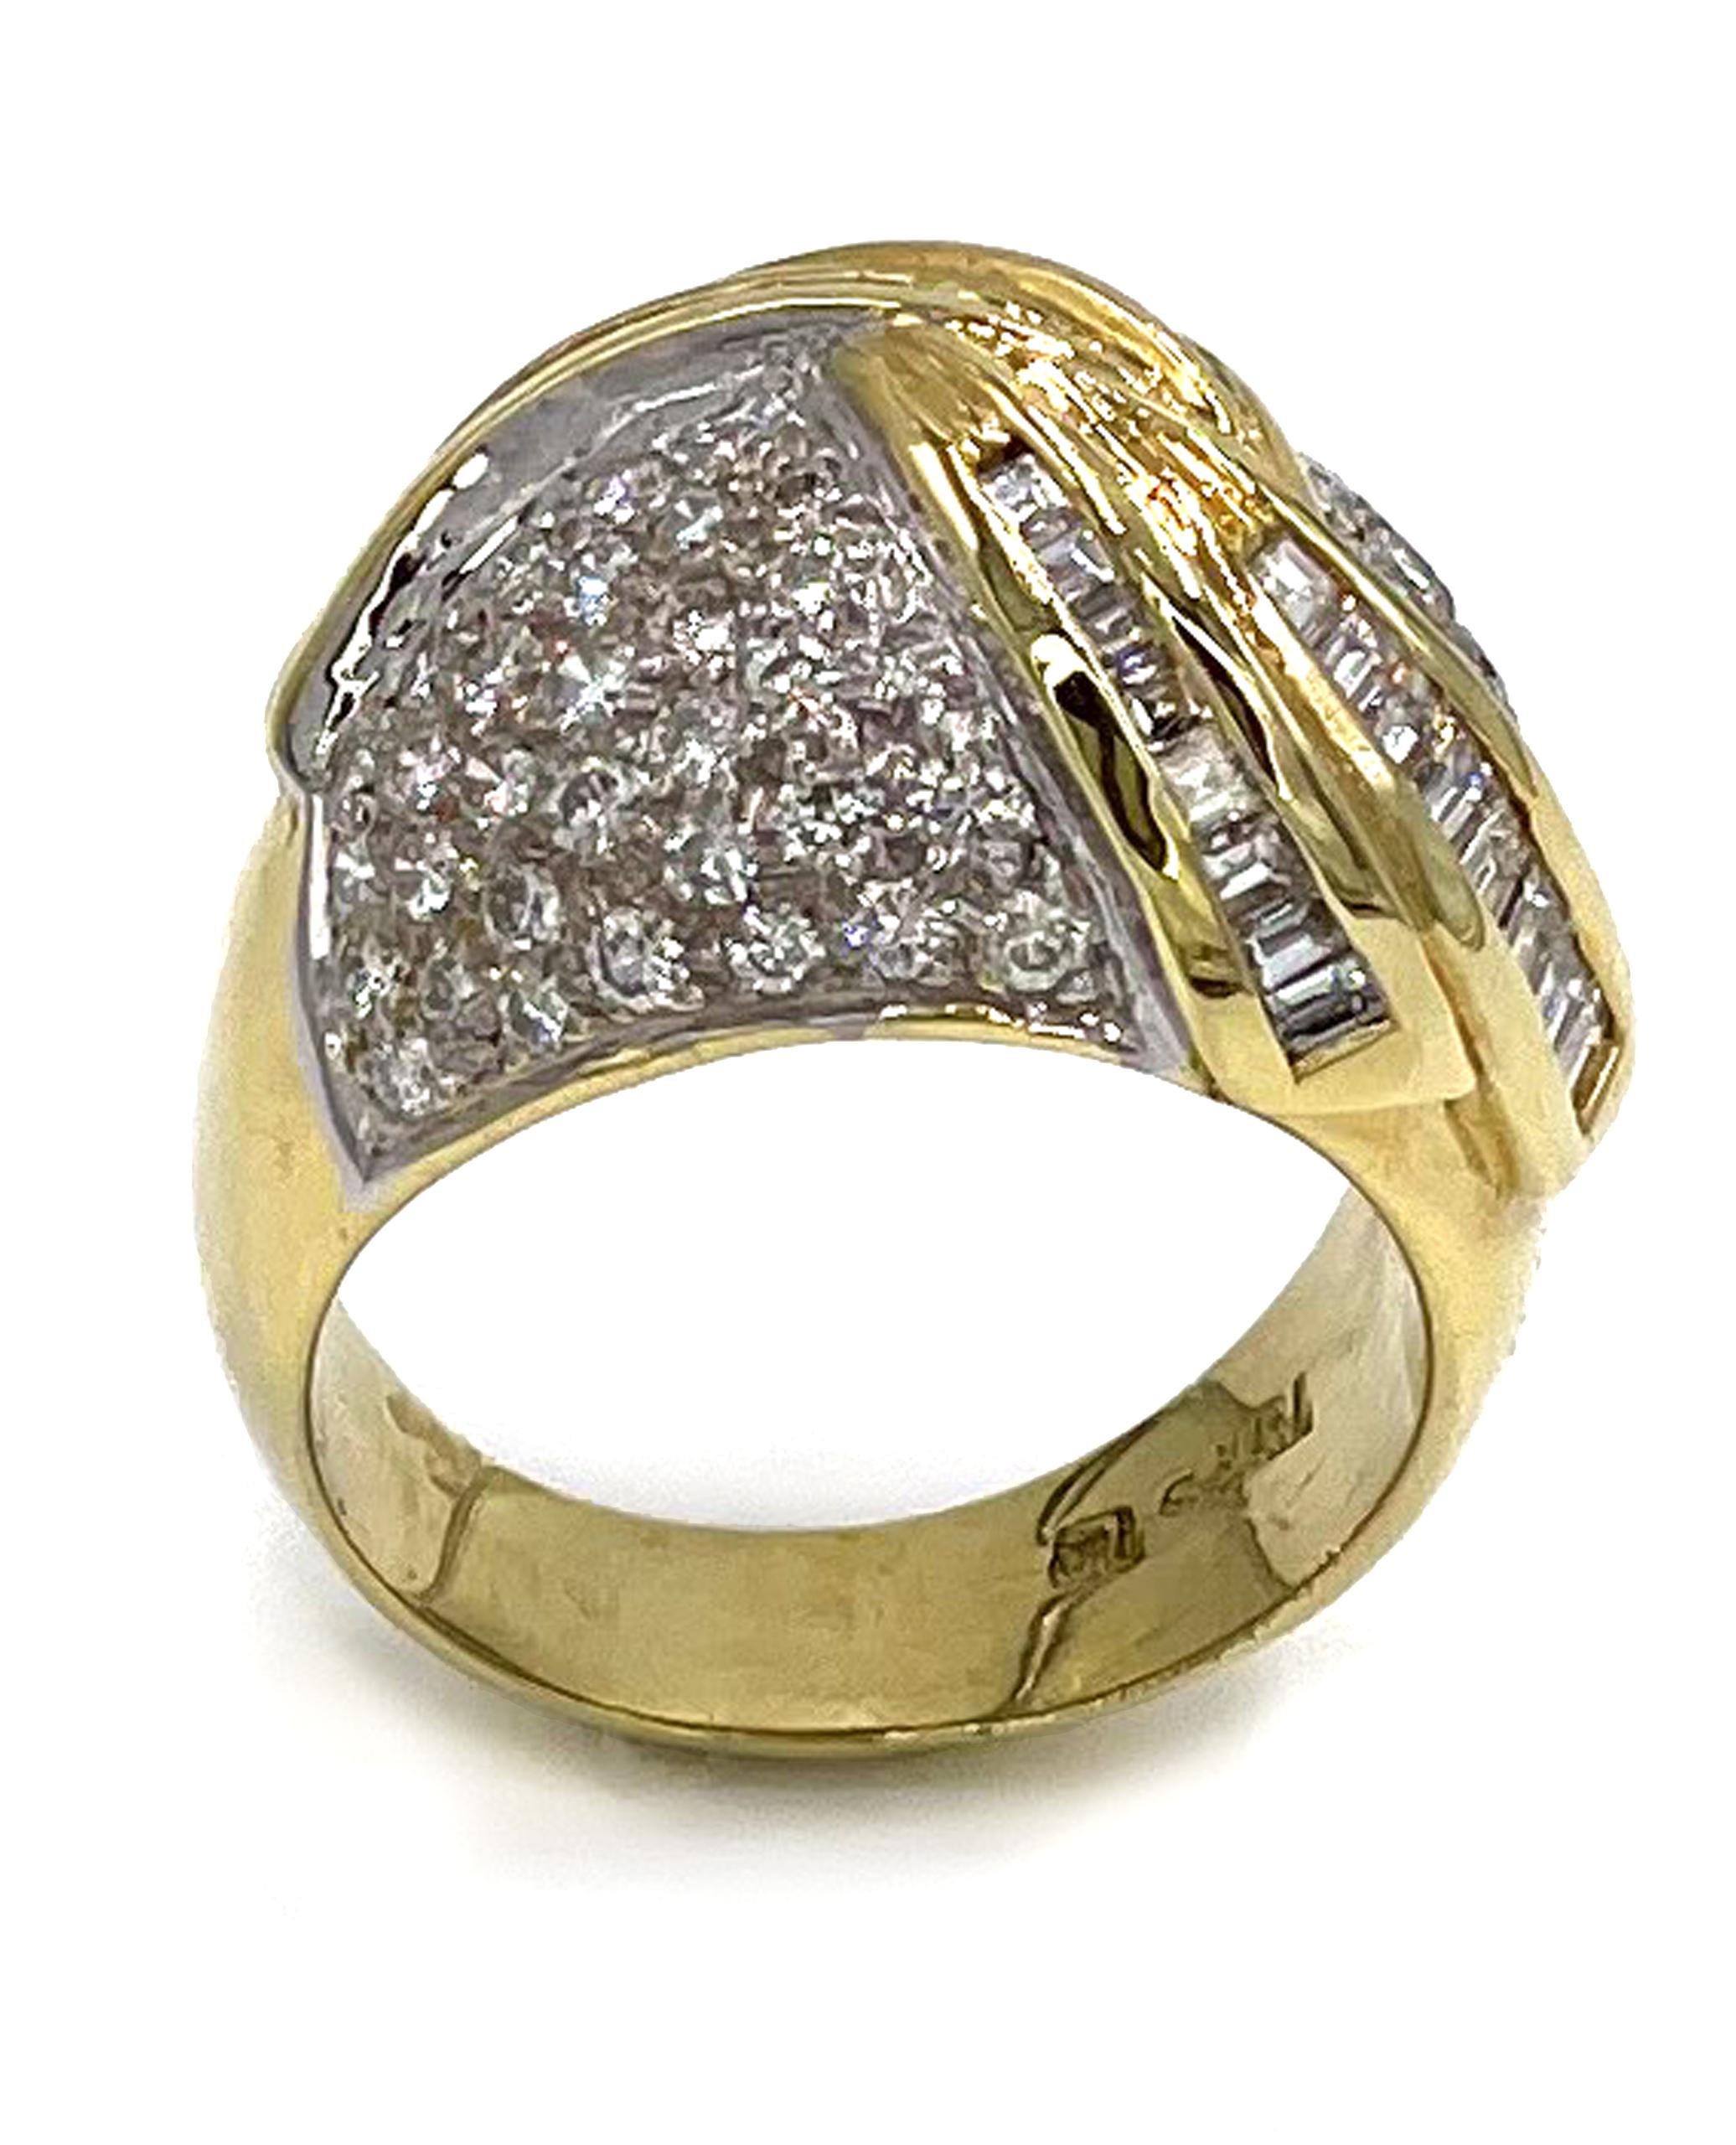 Taille ronde Vintage 18k Two Tone Pave Dome Ring, Circa 1985 en vente